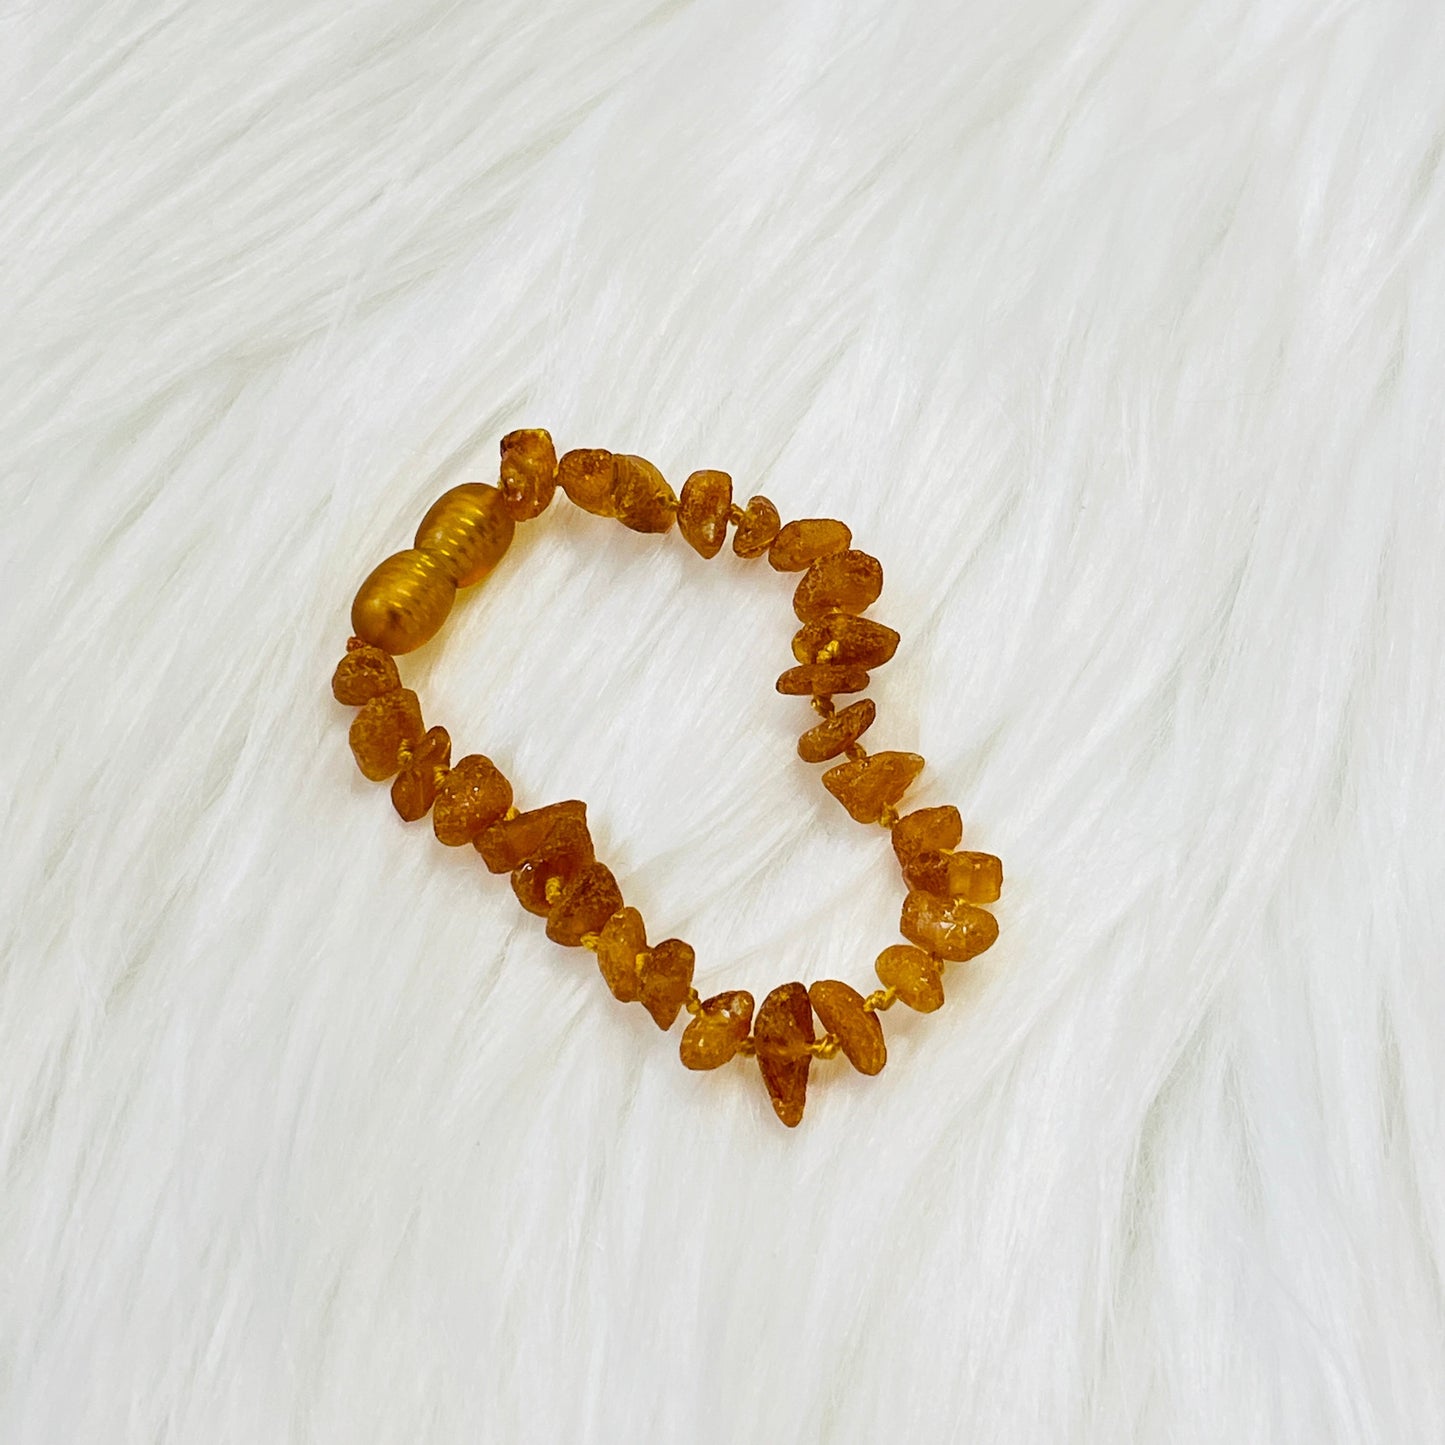 Authentic Lithuanian Baltic Amber Unpolished Honey Anklet - 5.5"